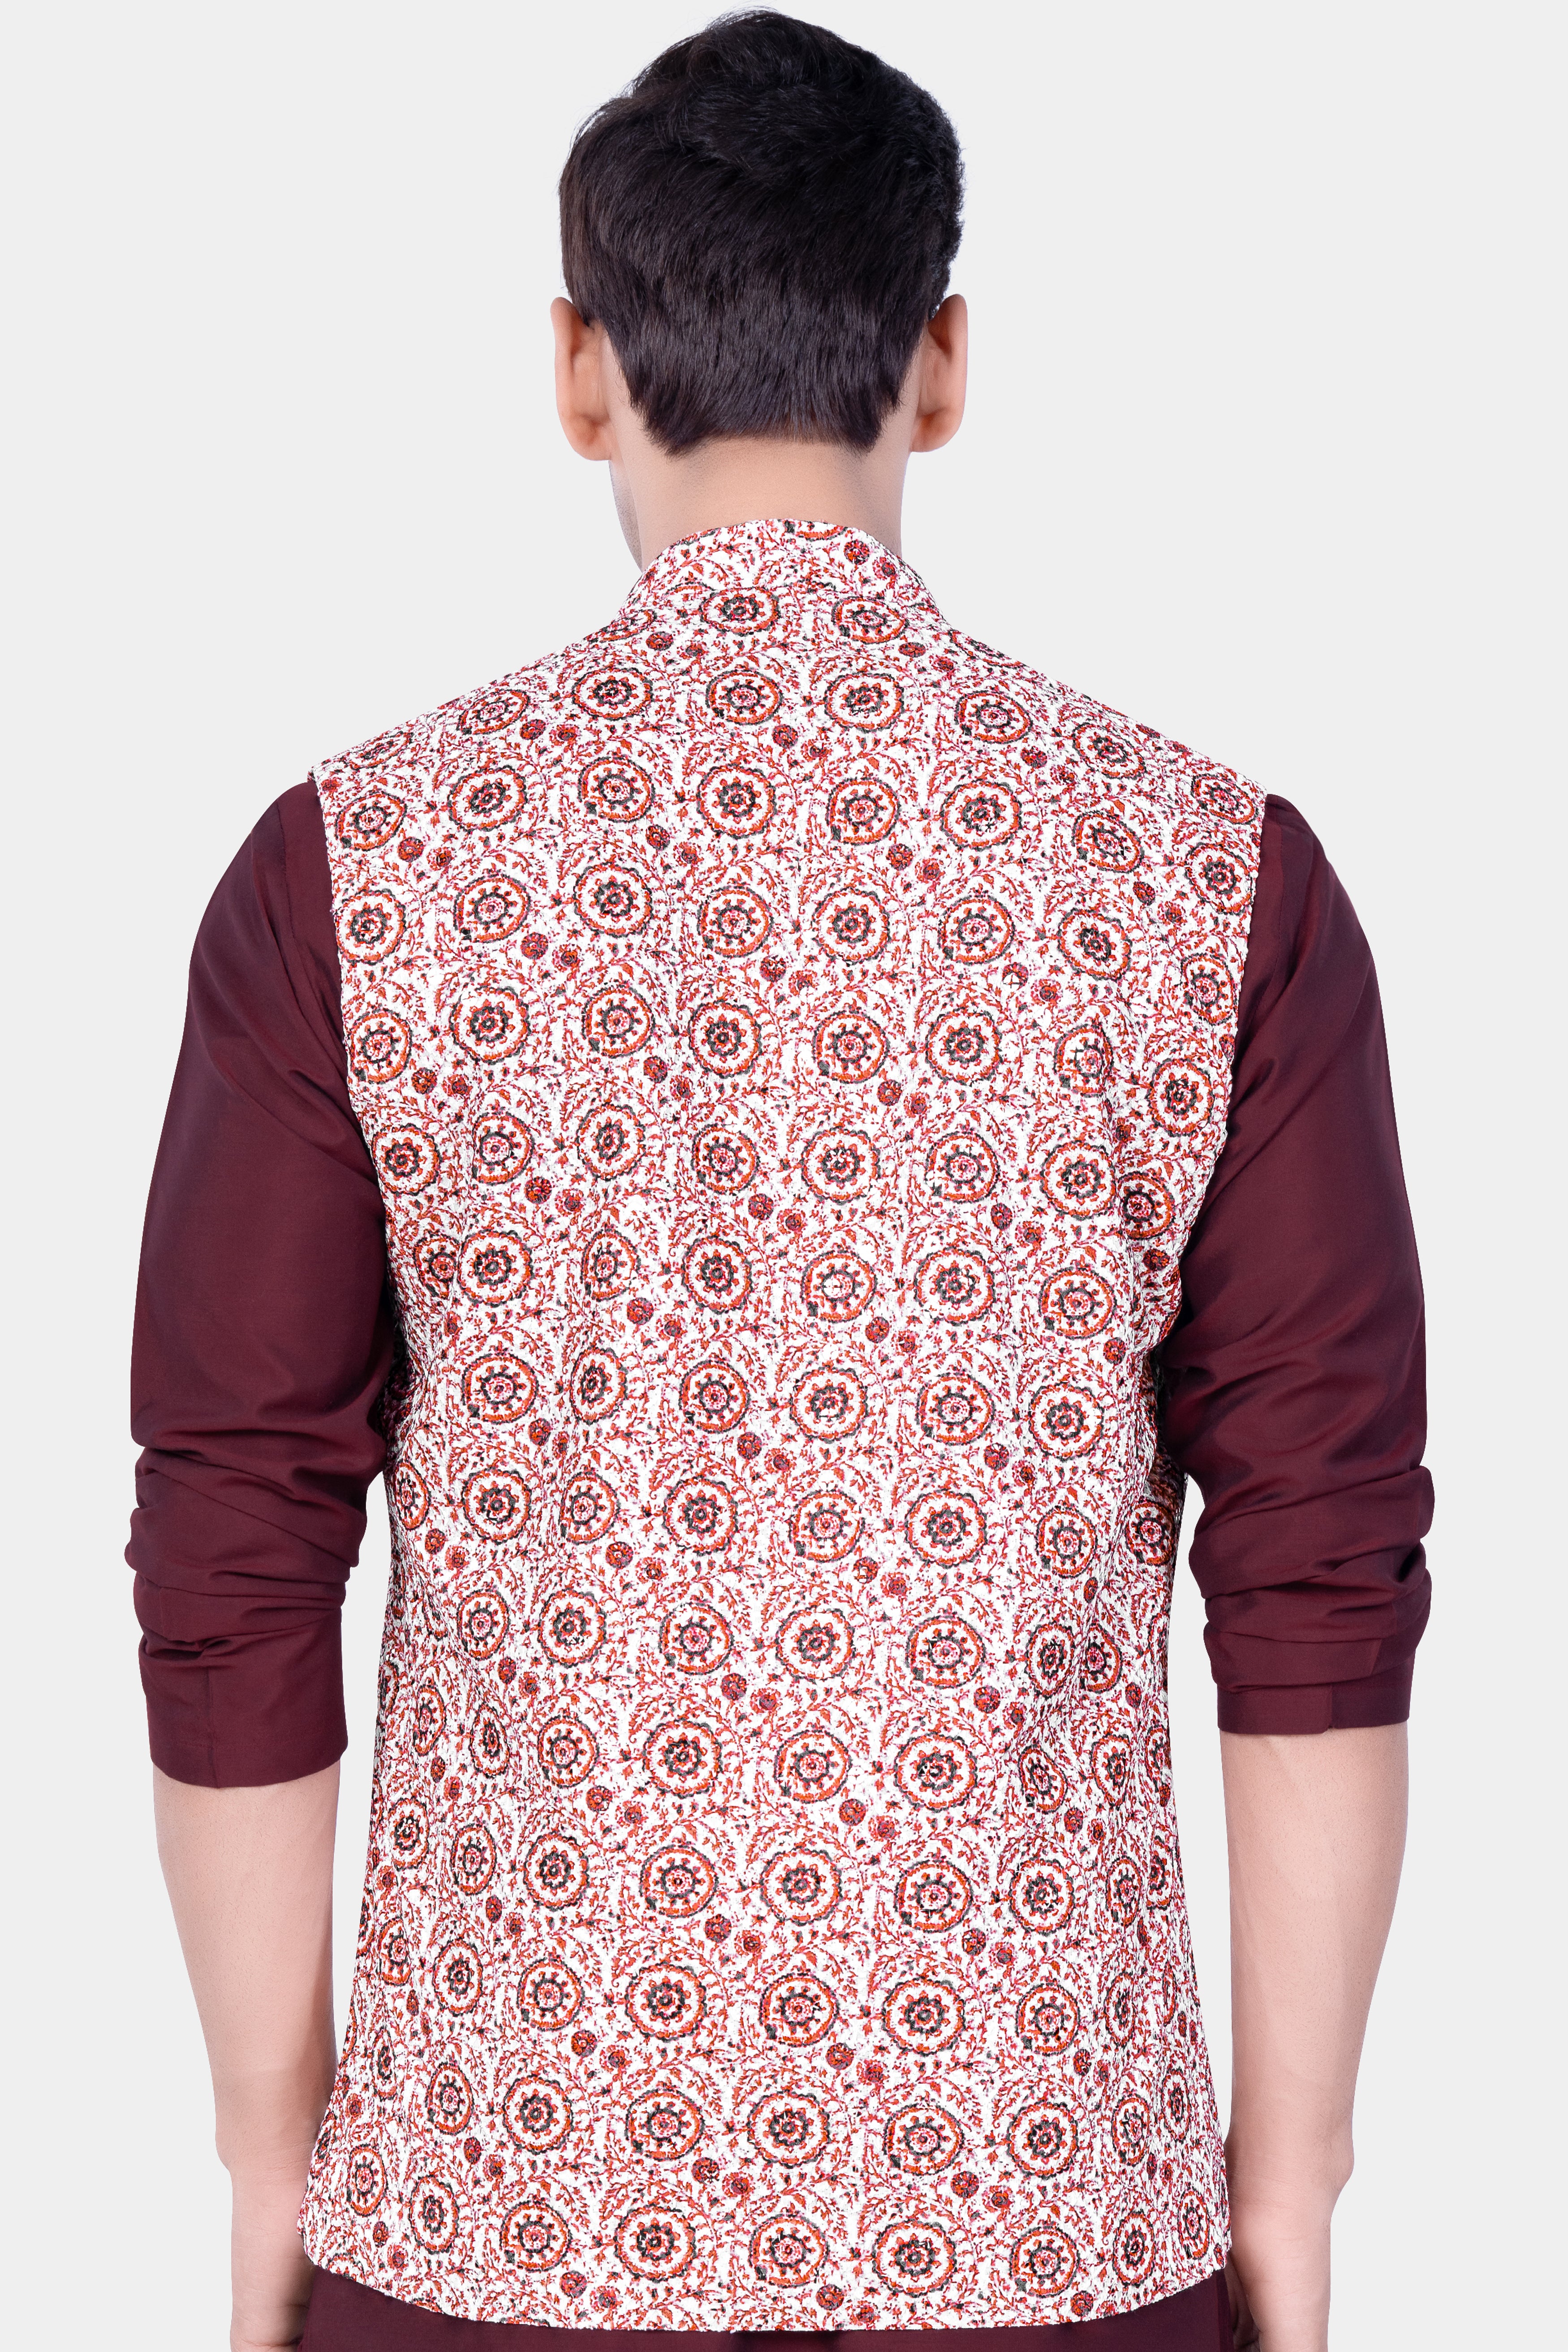 Copper Rust Brown And Bright White Embroidered Nehru Jacket